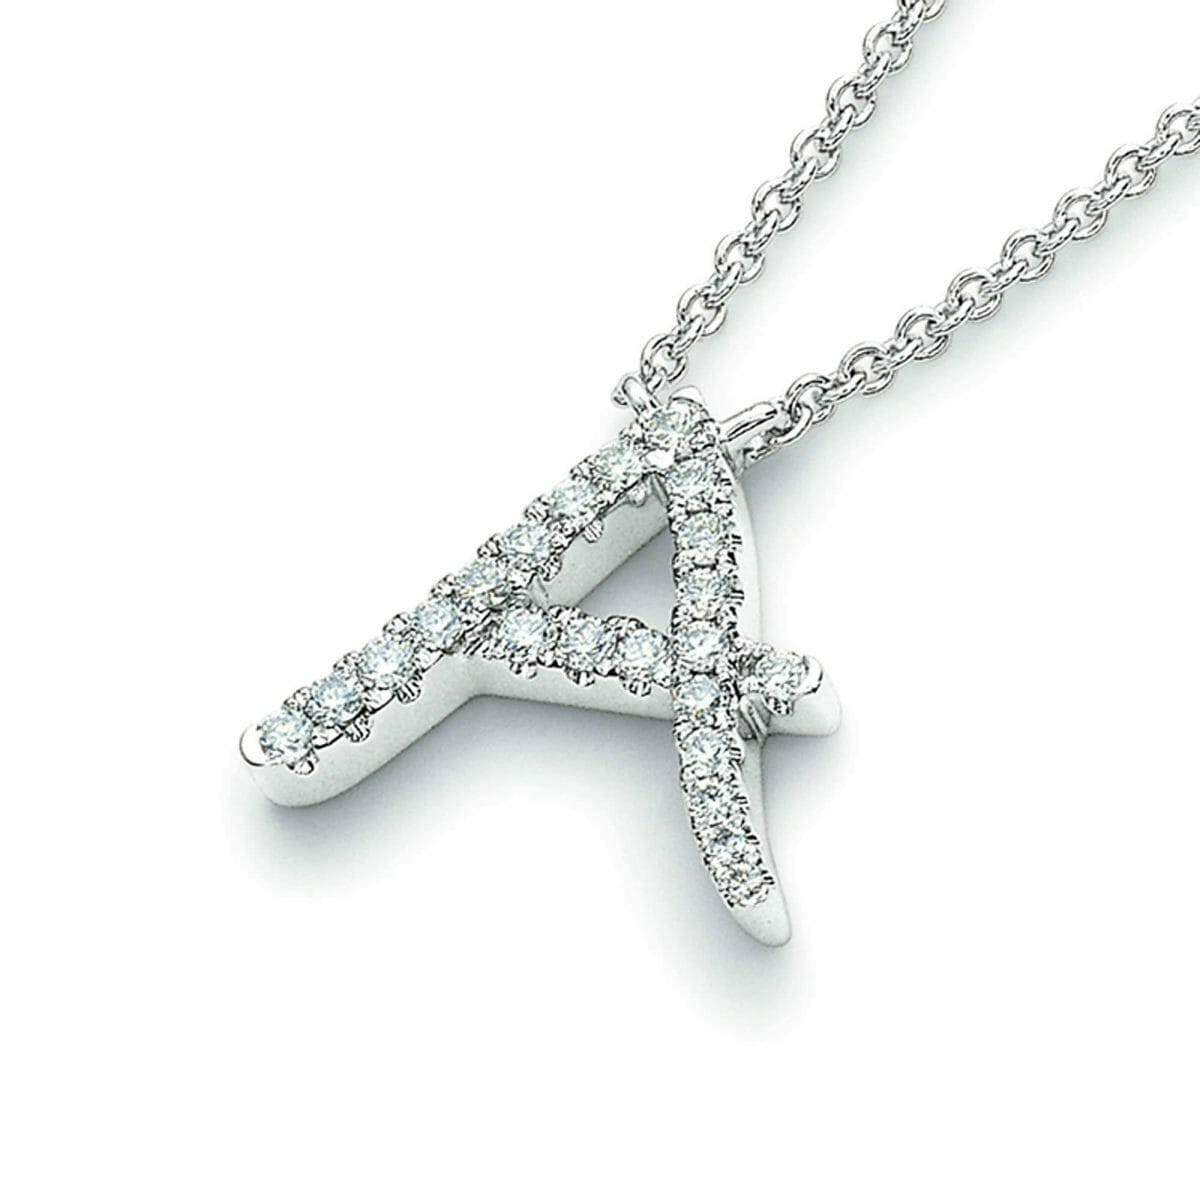 DMR Jewellery: The Perfect Gifts…